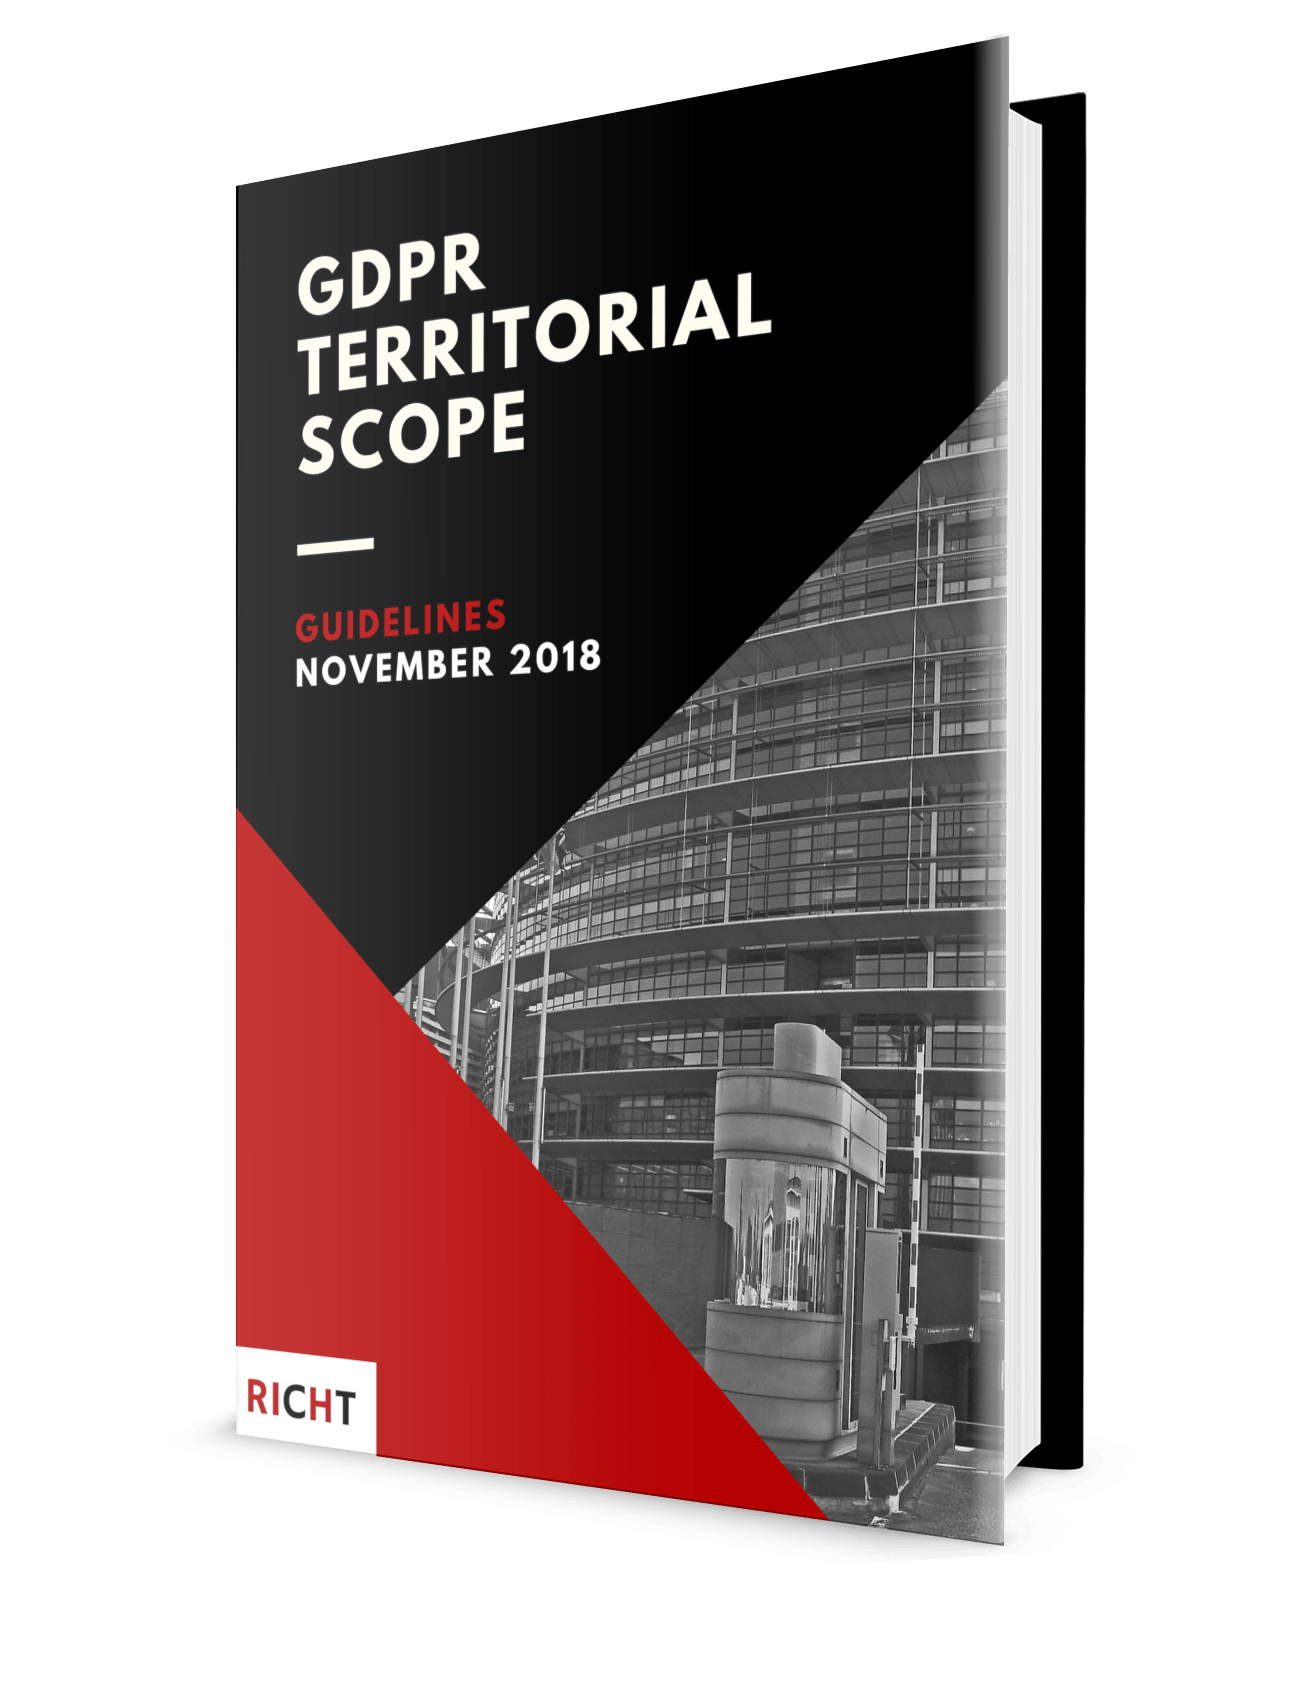 Read the guidelines regarding the territorial scope and reach of the GDPR. 